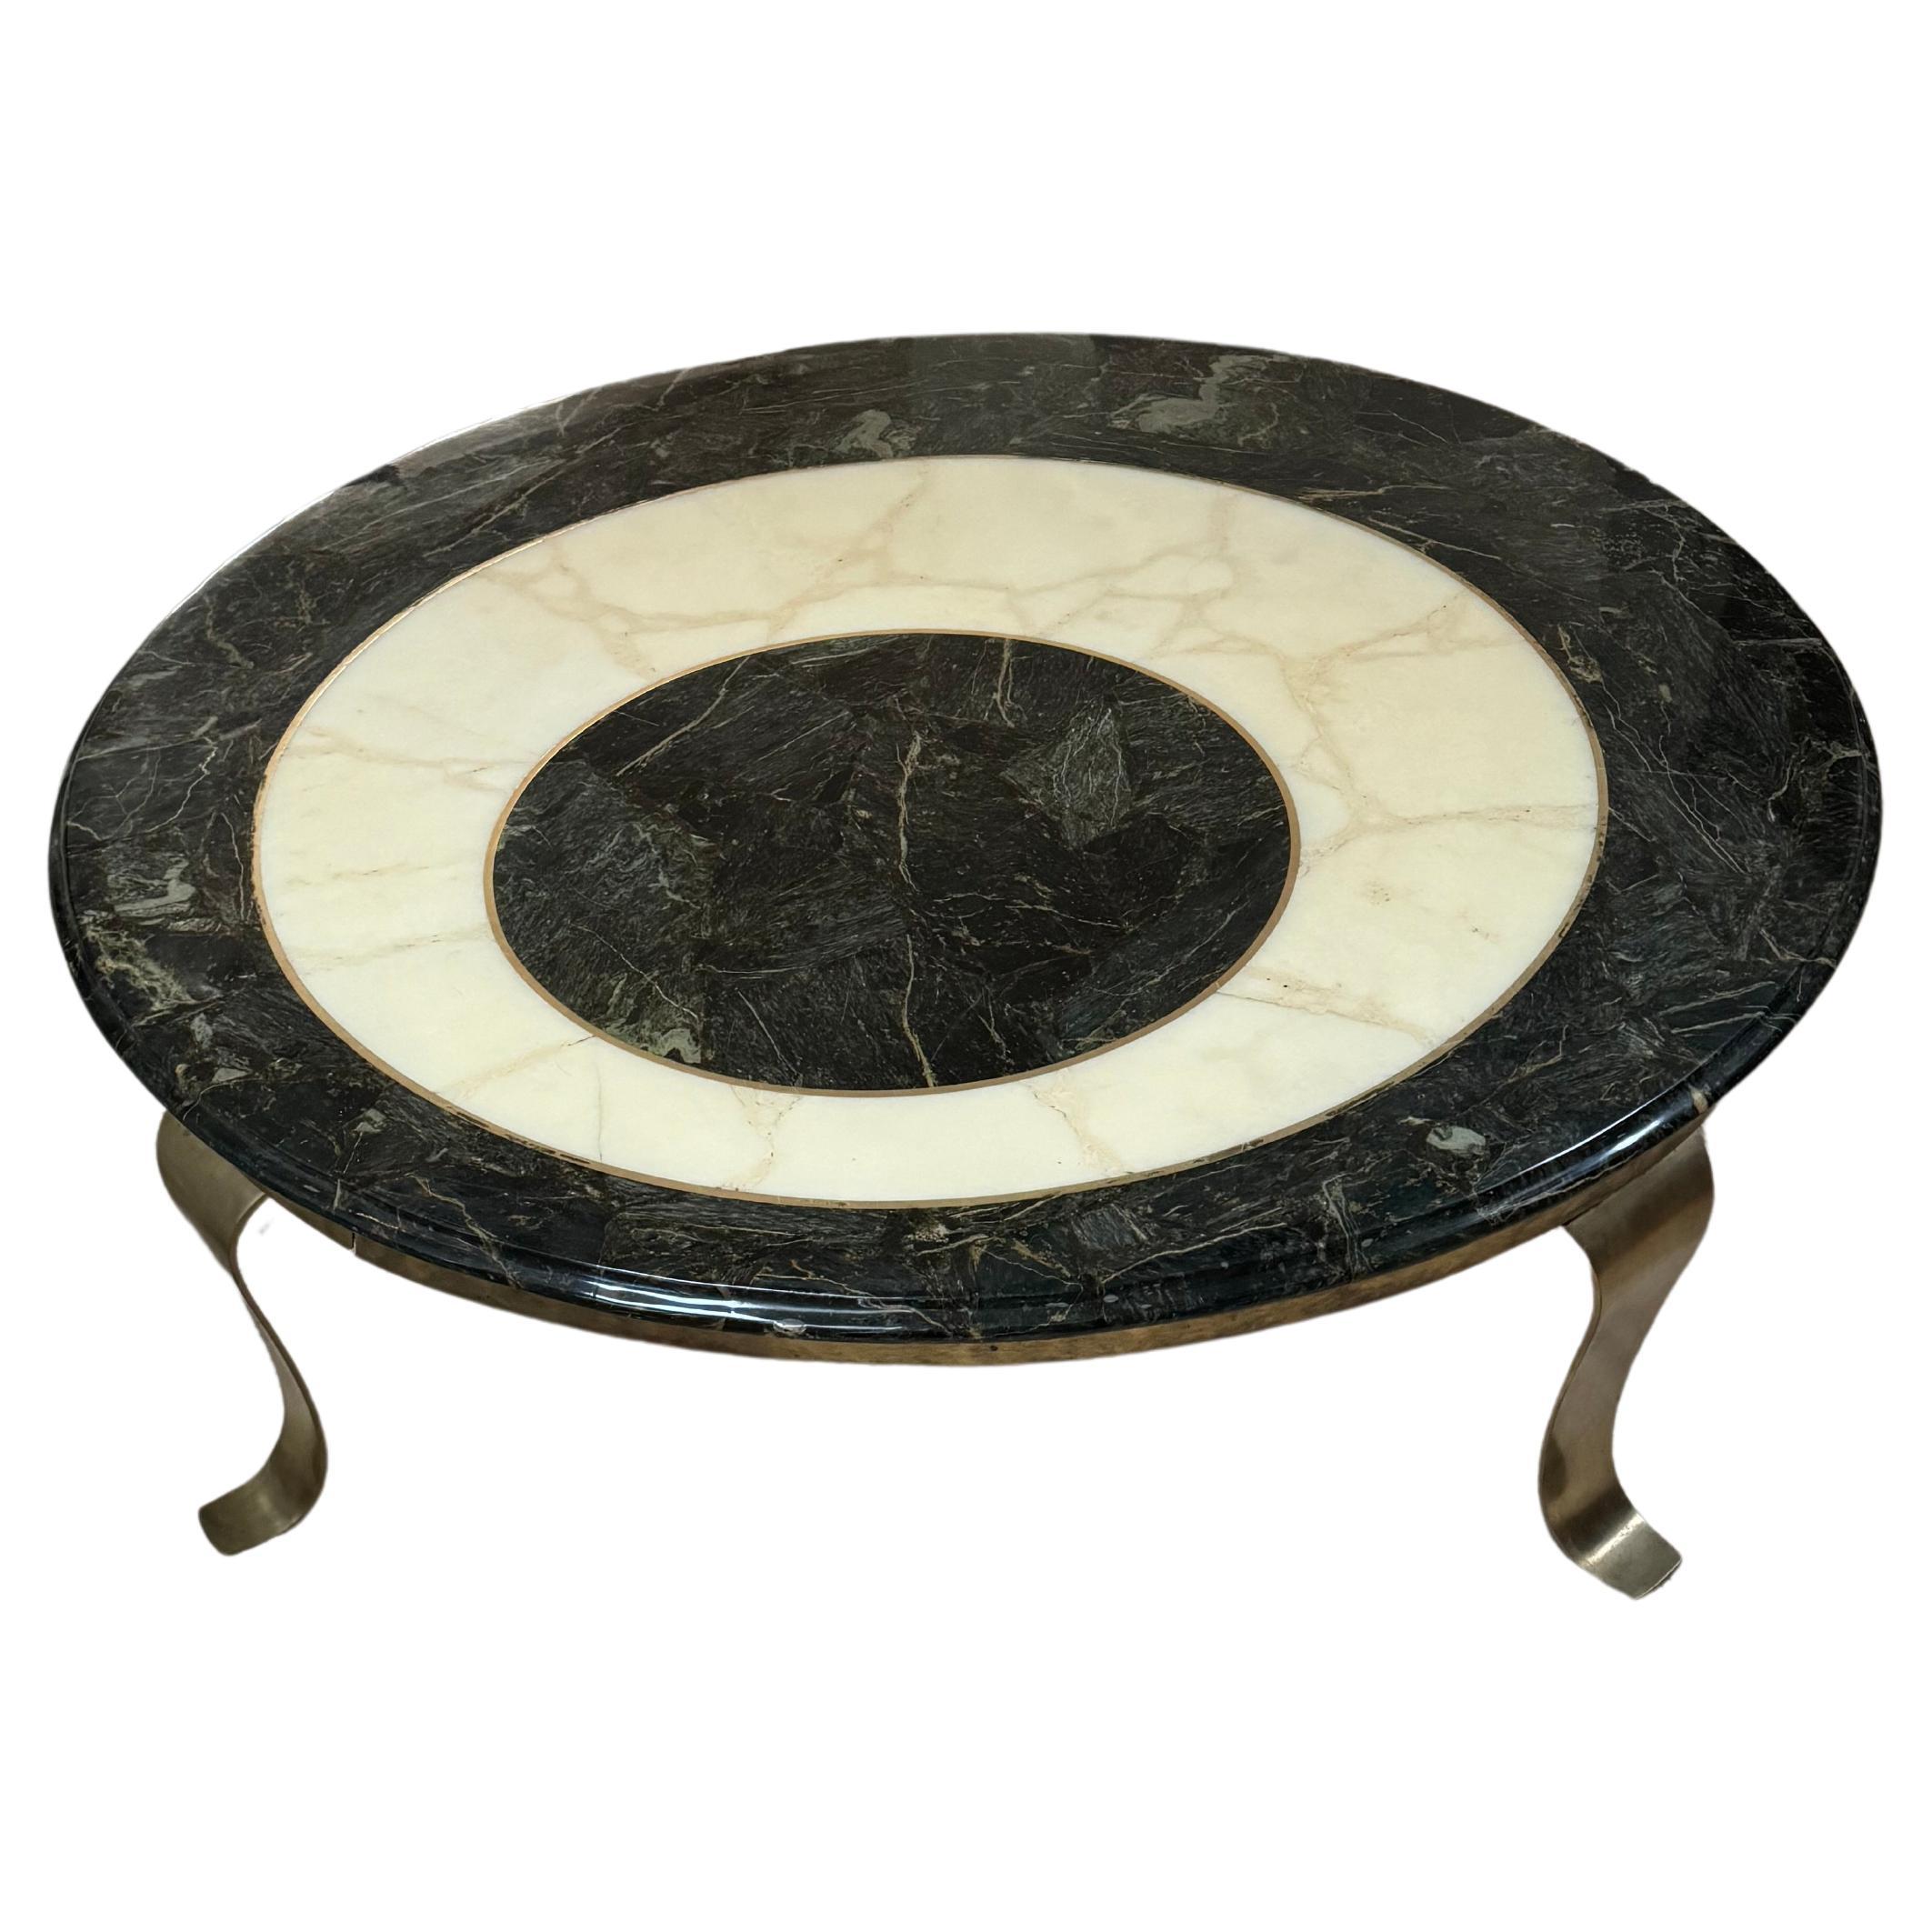 1960s Green and Cream Onyx Coffee Table by Arturo Pani for Muller of Mexico For Sale